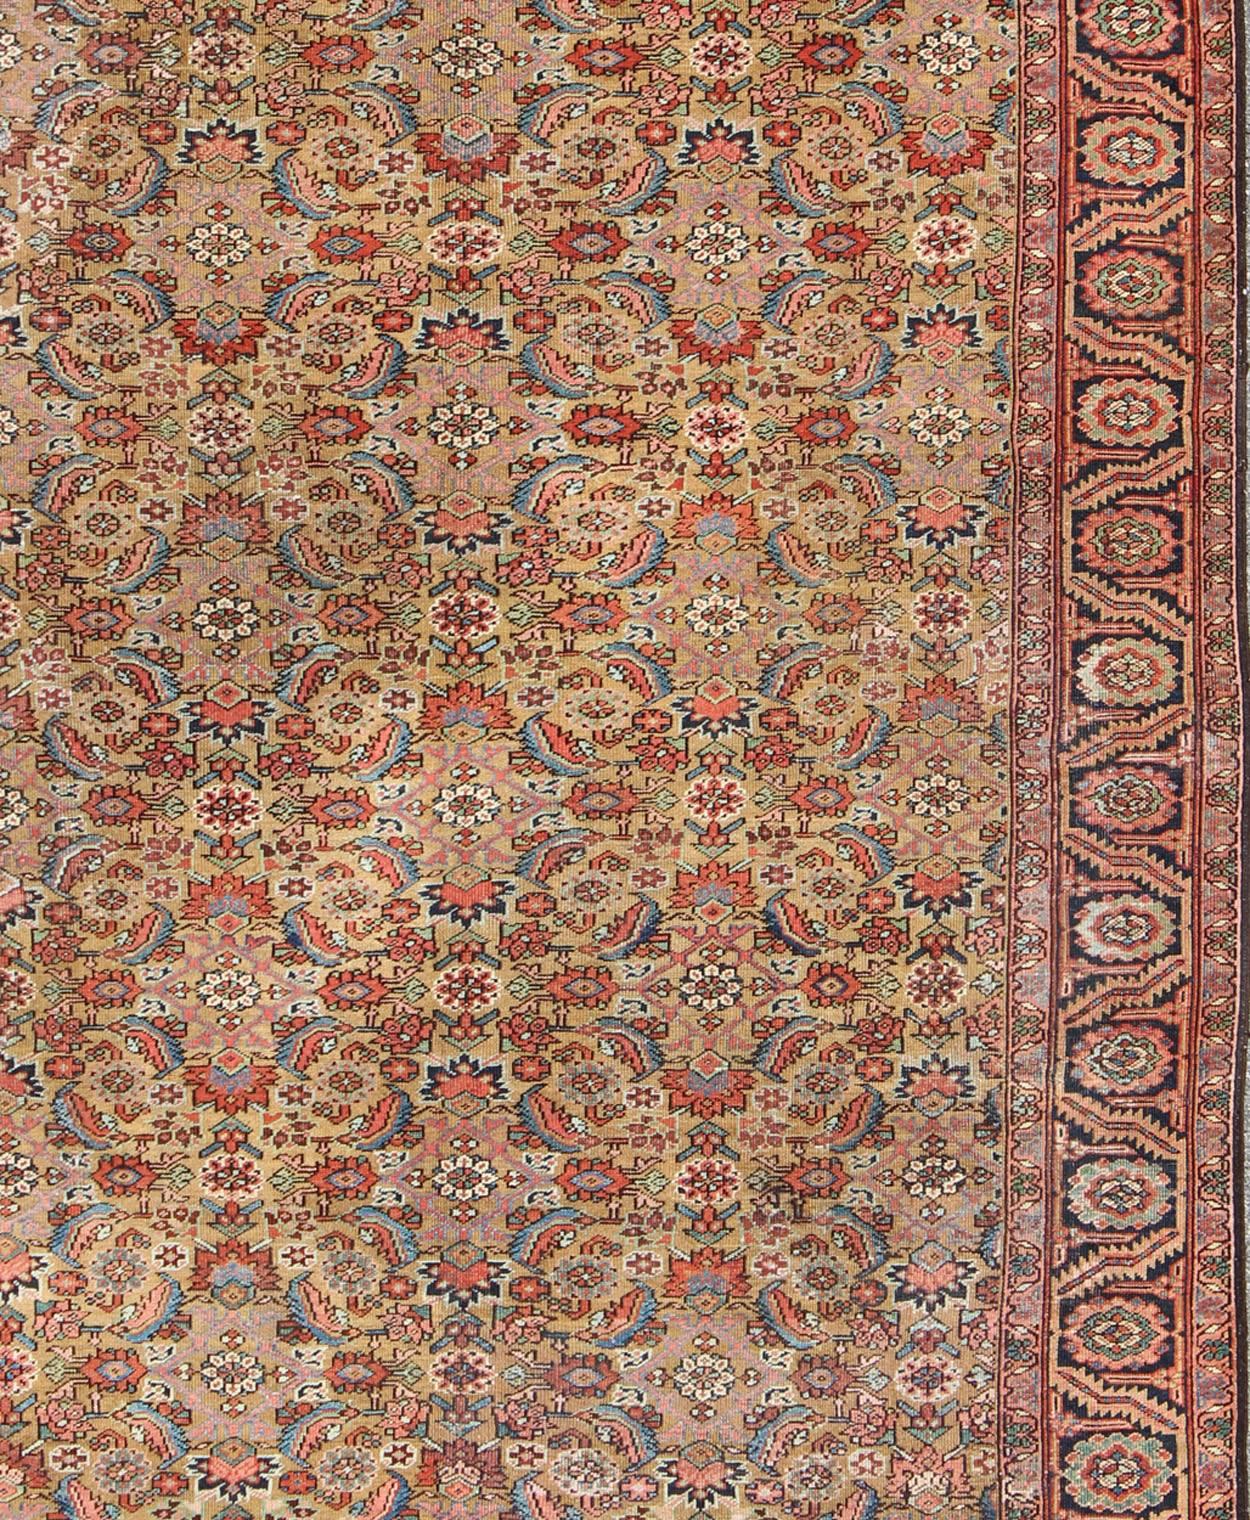 Hand-Knotted Antique Persian Bakhshaish Carpet with All Over Herati Design in Gold and Blue